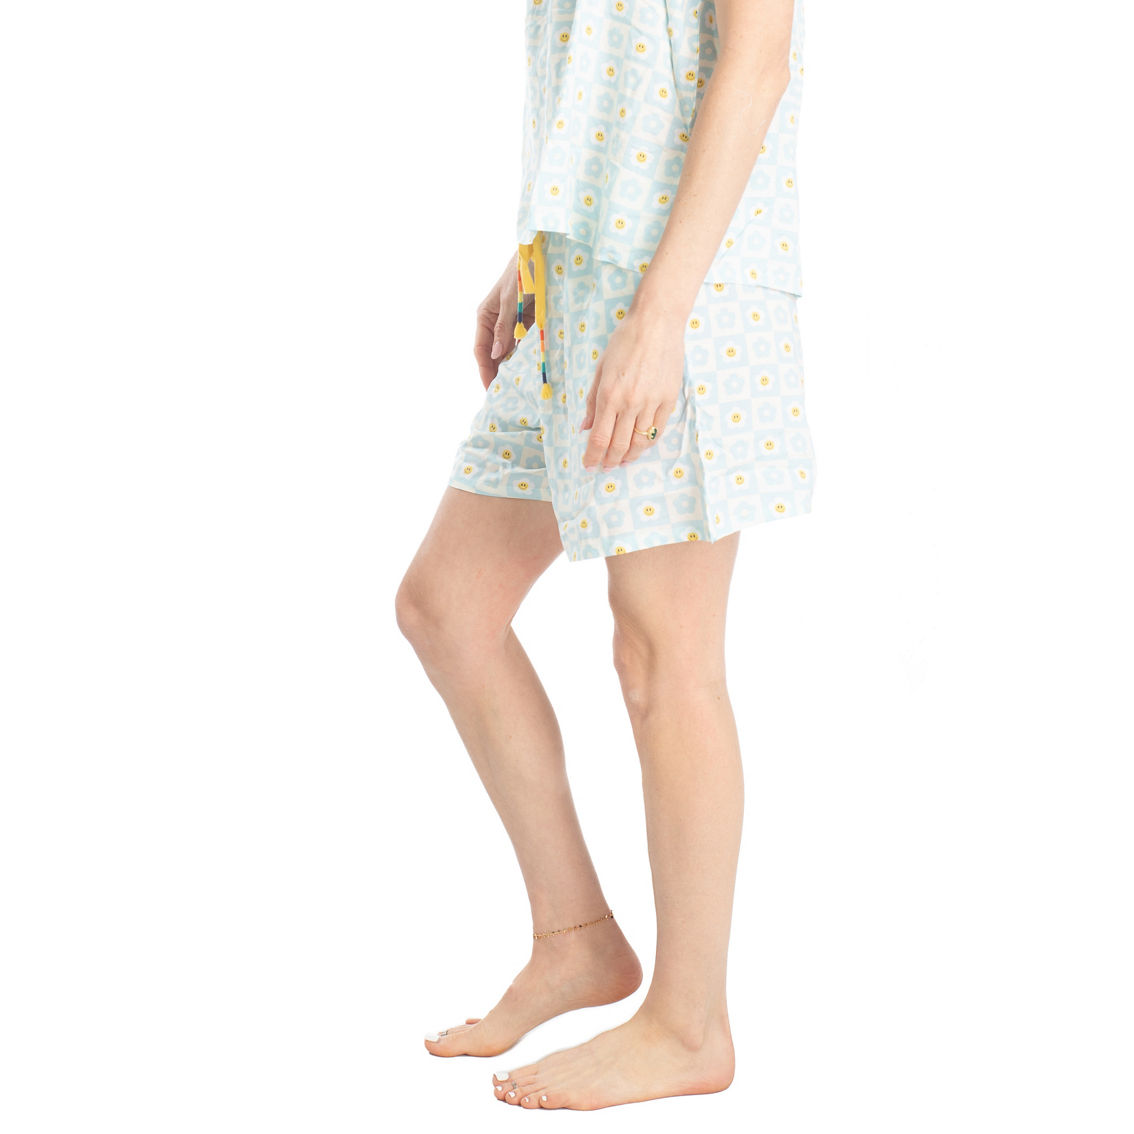 Ocean Pacific Pacific Vibes Cami Short rayon set - Image 2 of 2